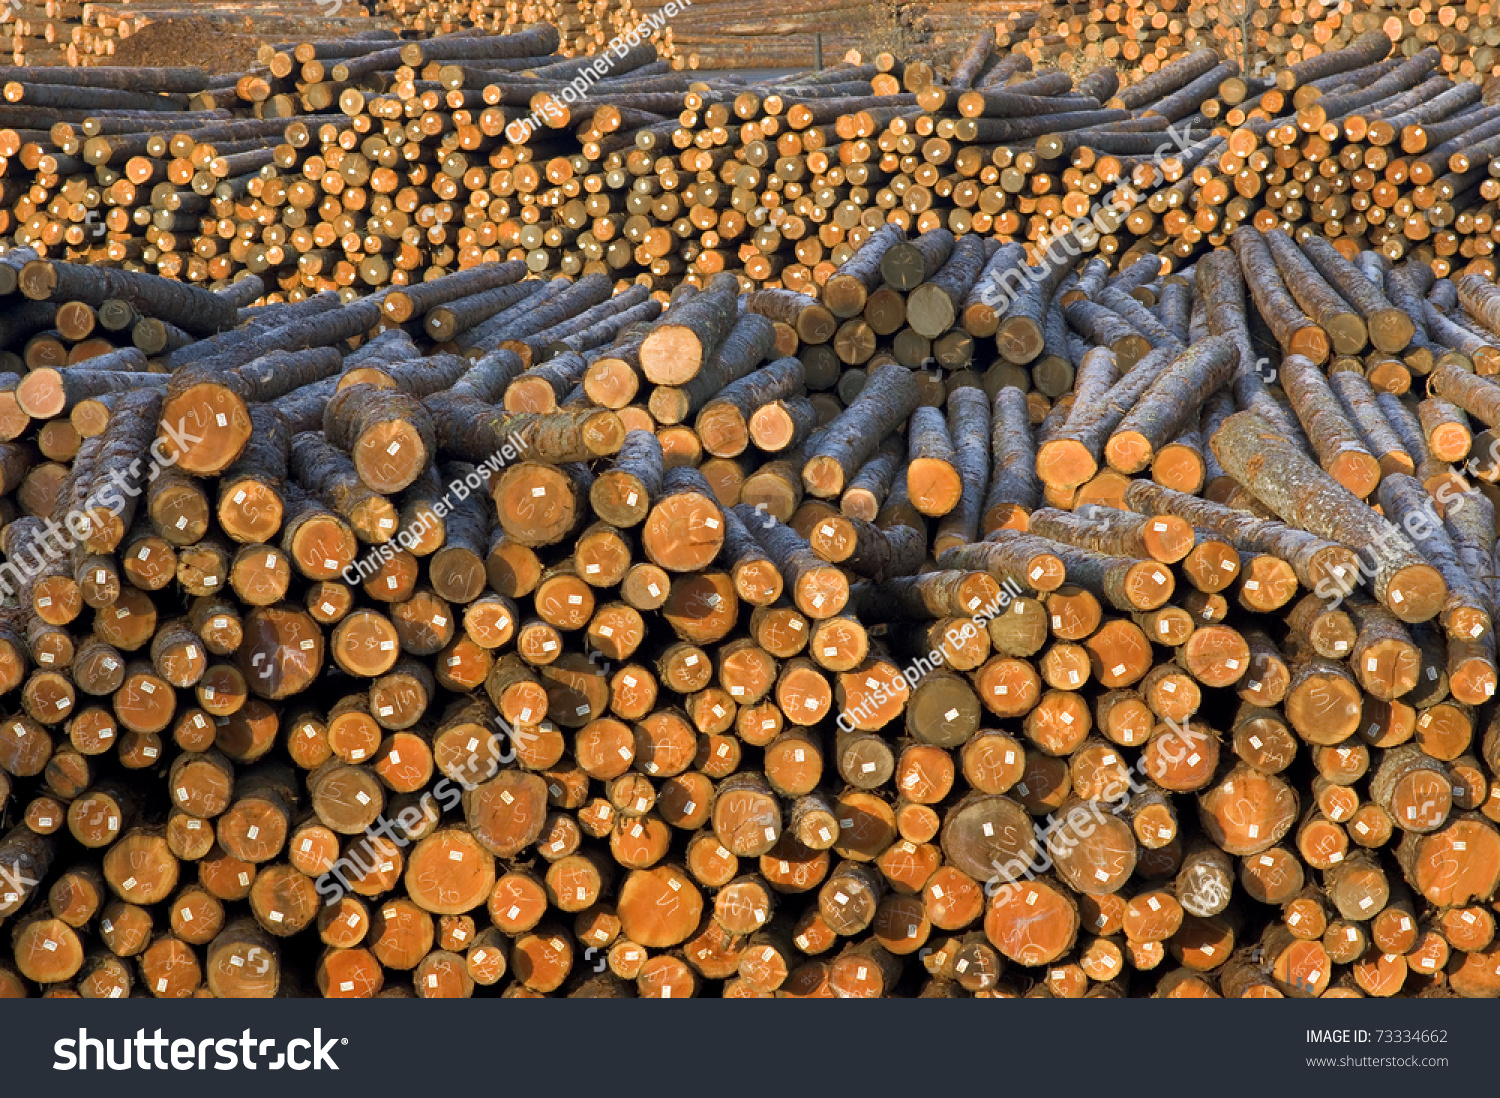 stock-photo-long-straight-logs-in-wood-pile-in-lumber-mill-waiting-for-production-73334662.jpg